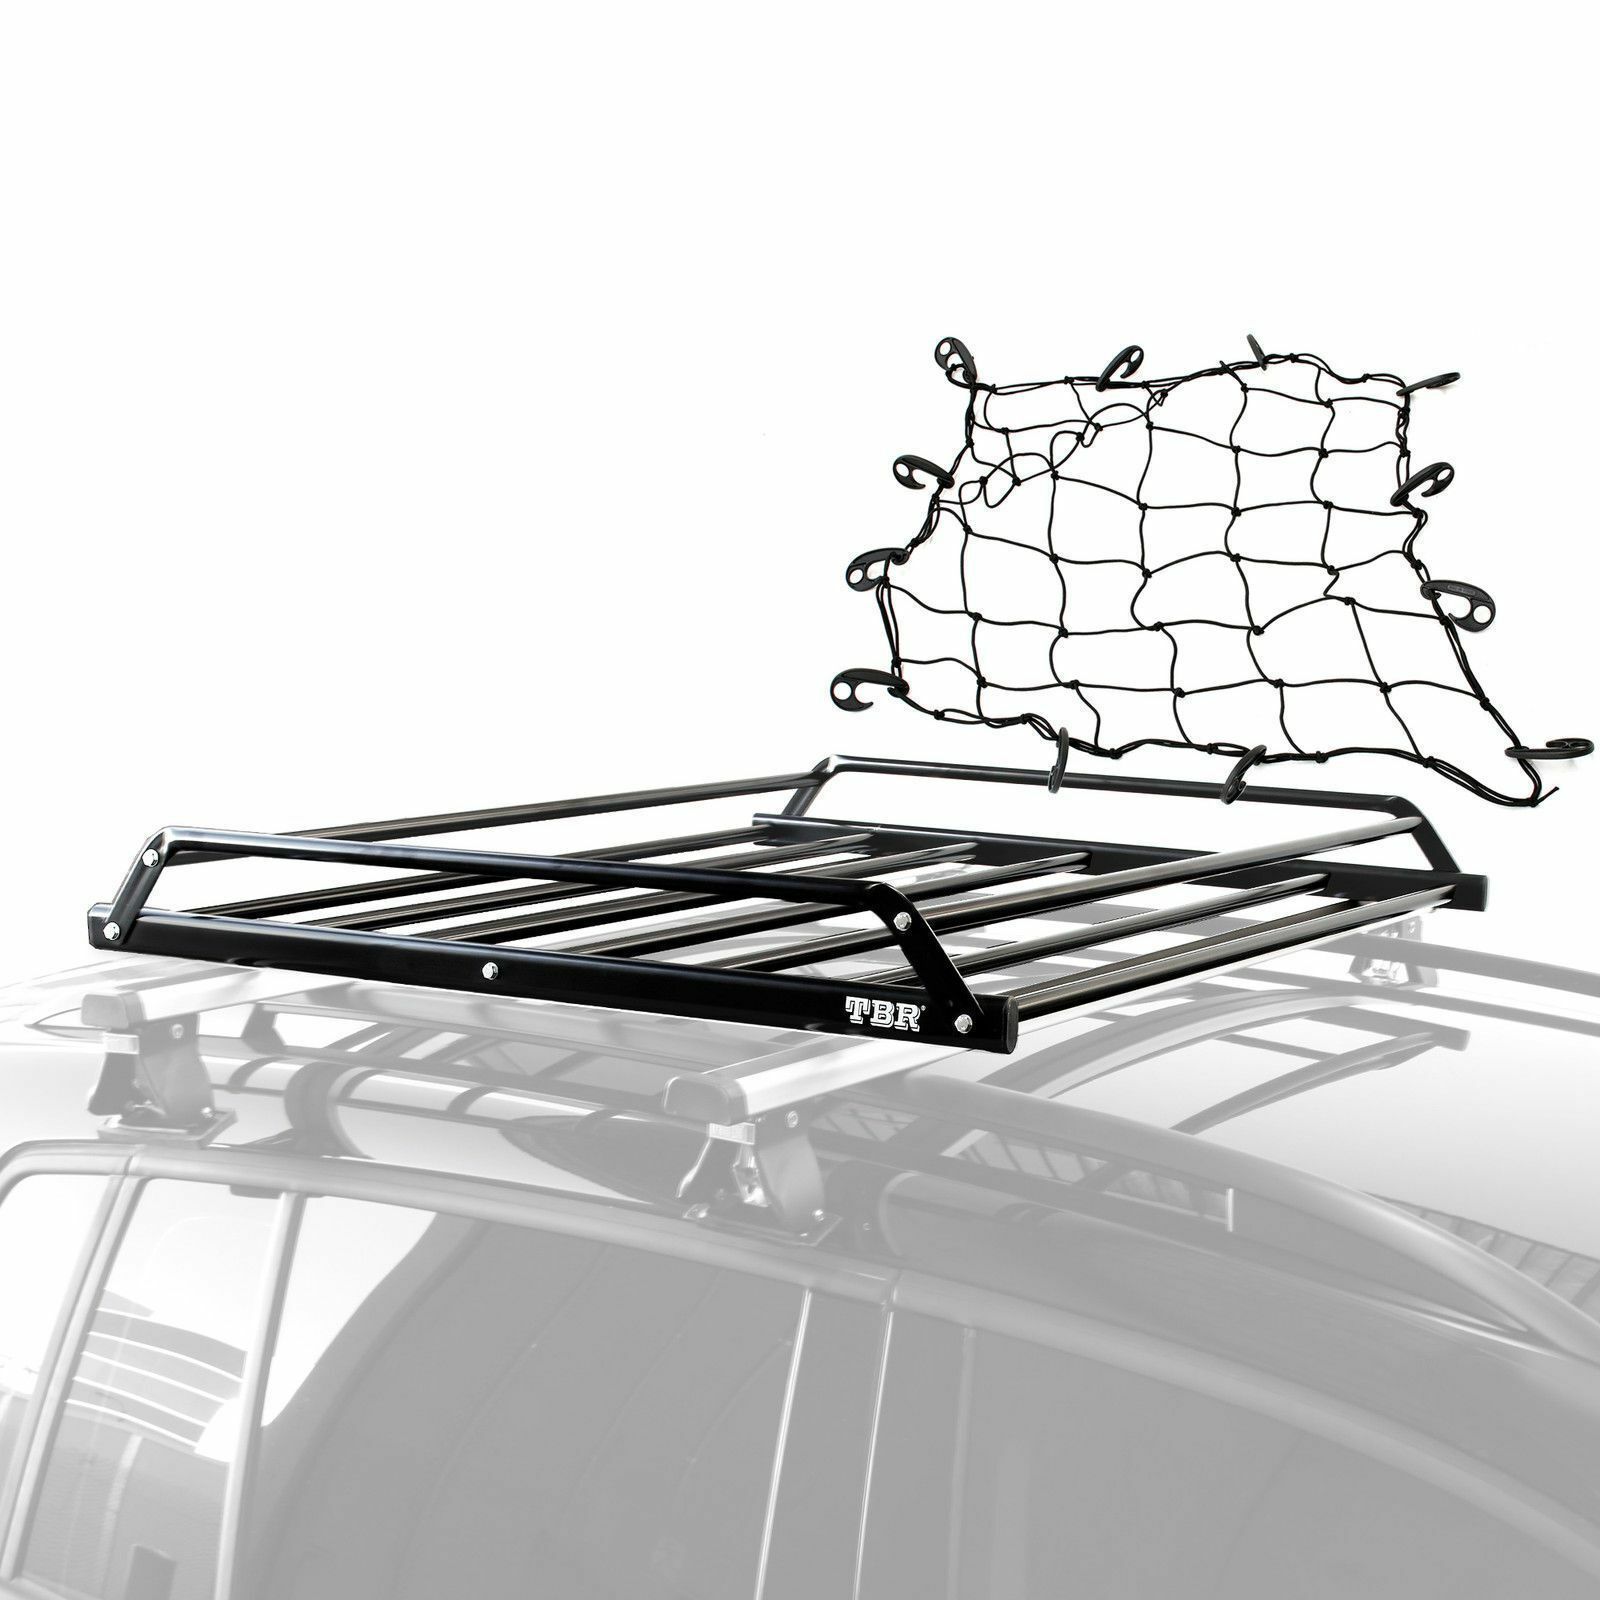 Get yourself a roof rack made from lightweight